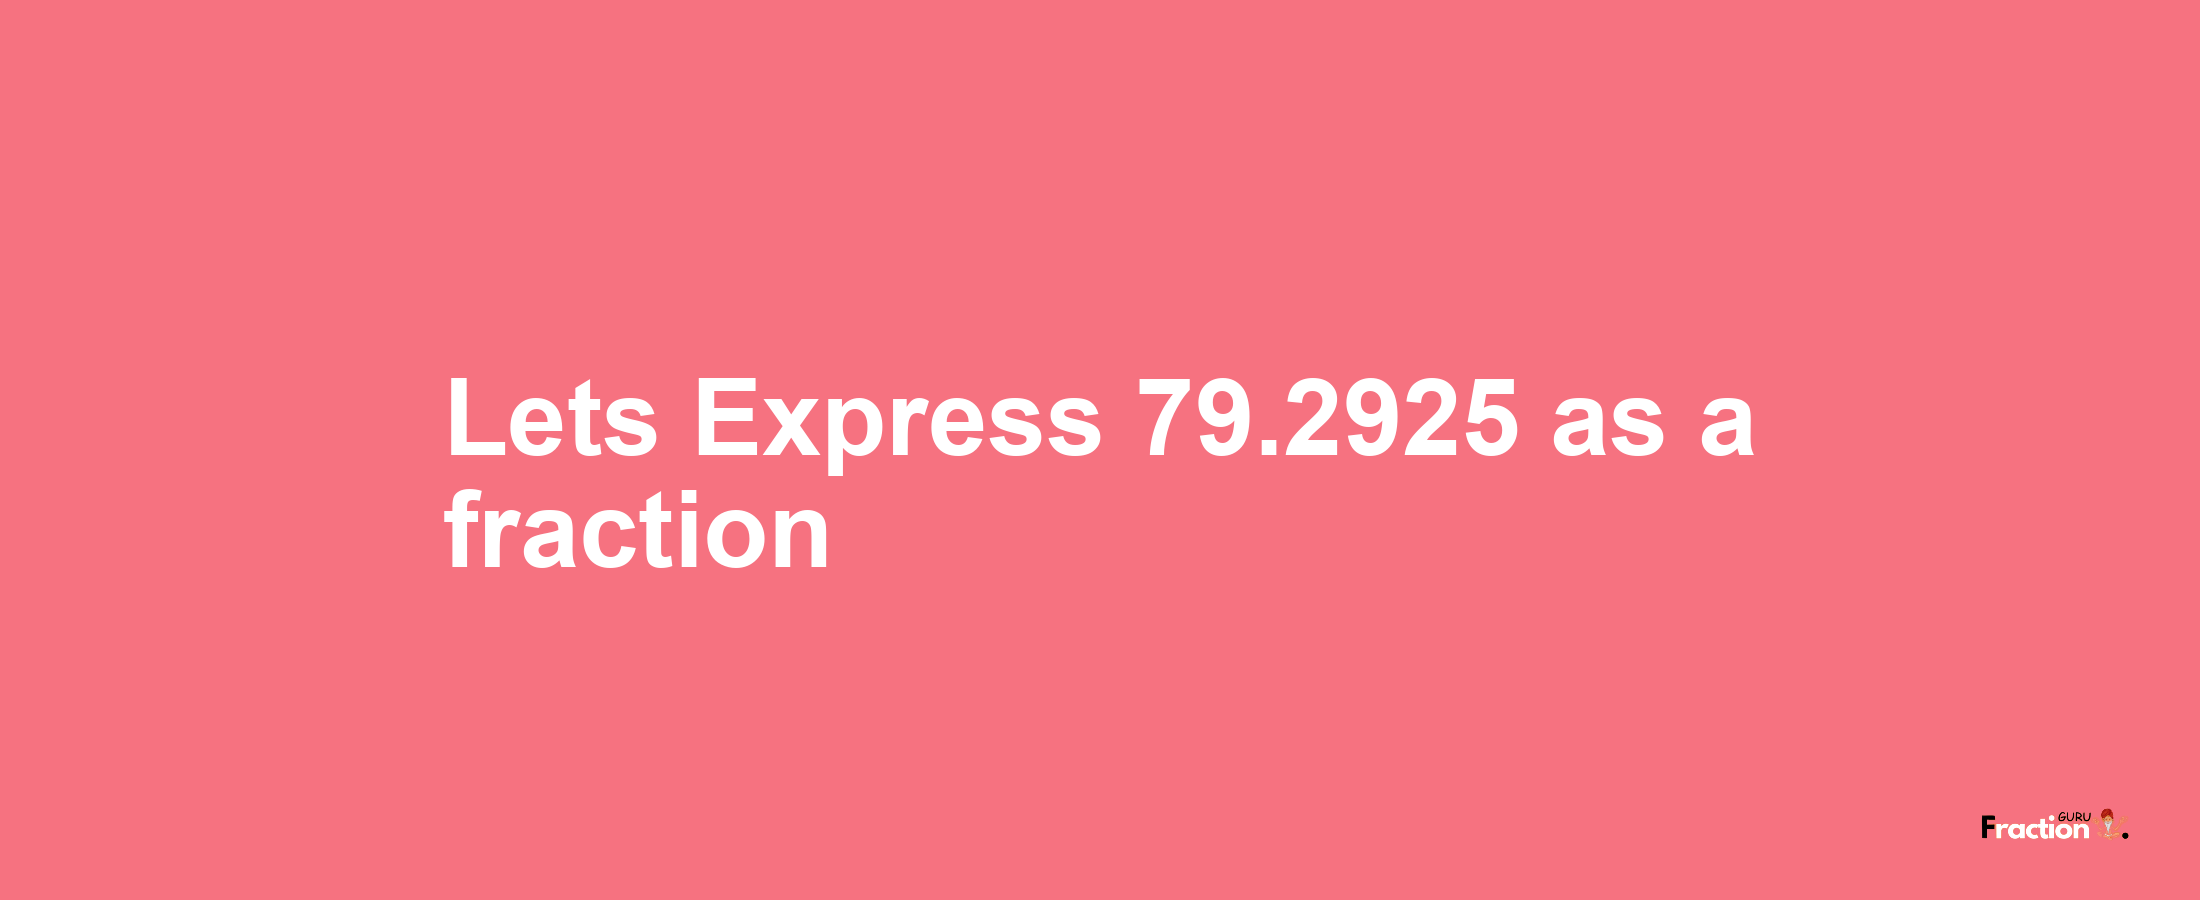 Lets Express 79.2925 as afraction